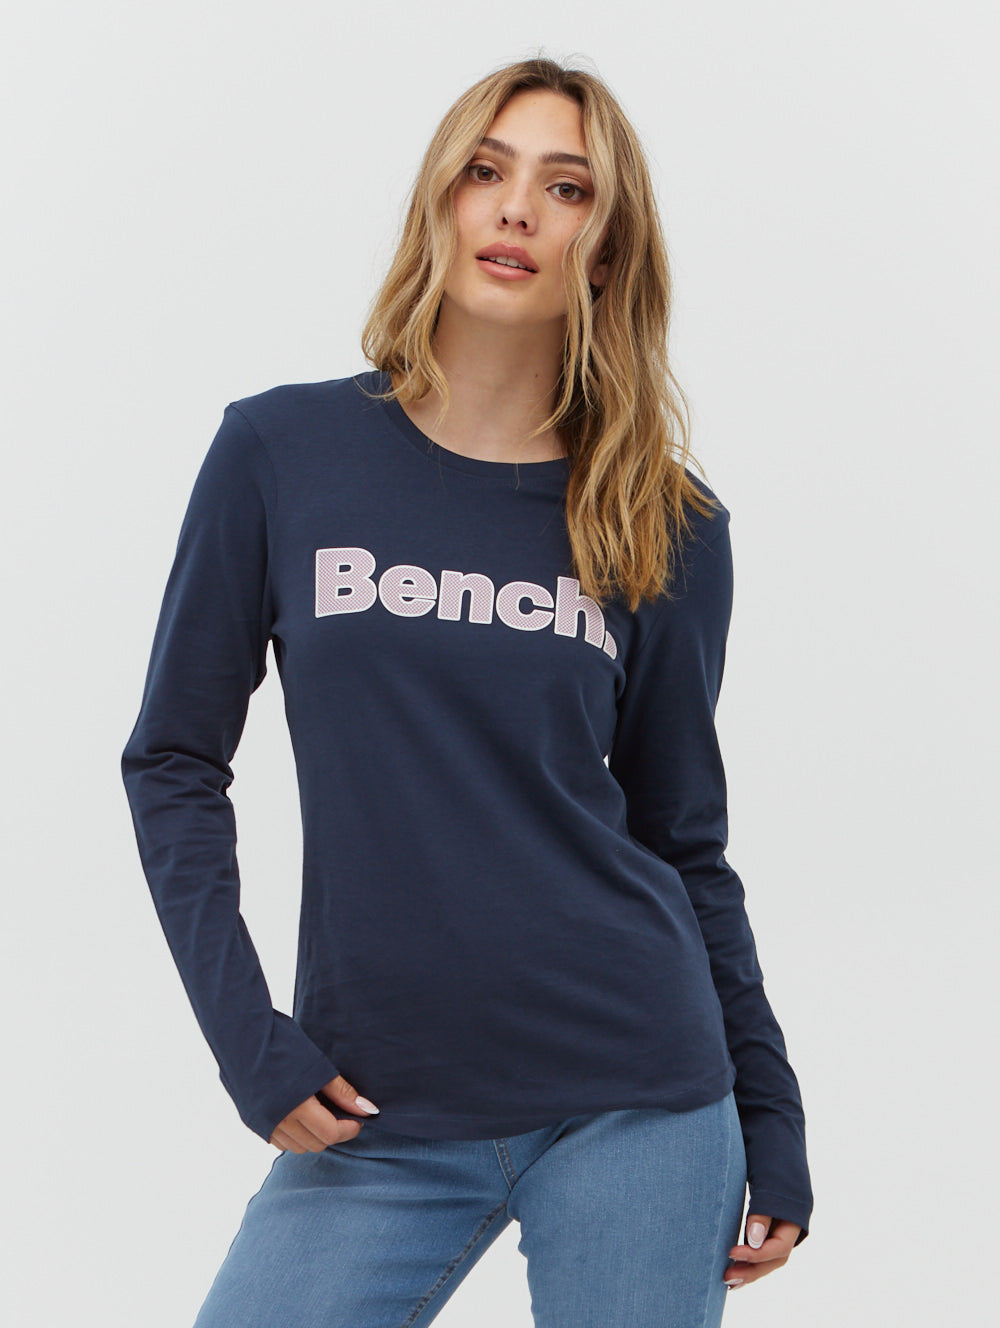 Women\'s Tops and Sweaters - Bench | Rundhalsshirts